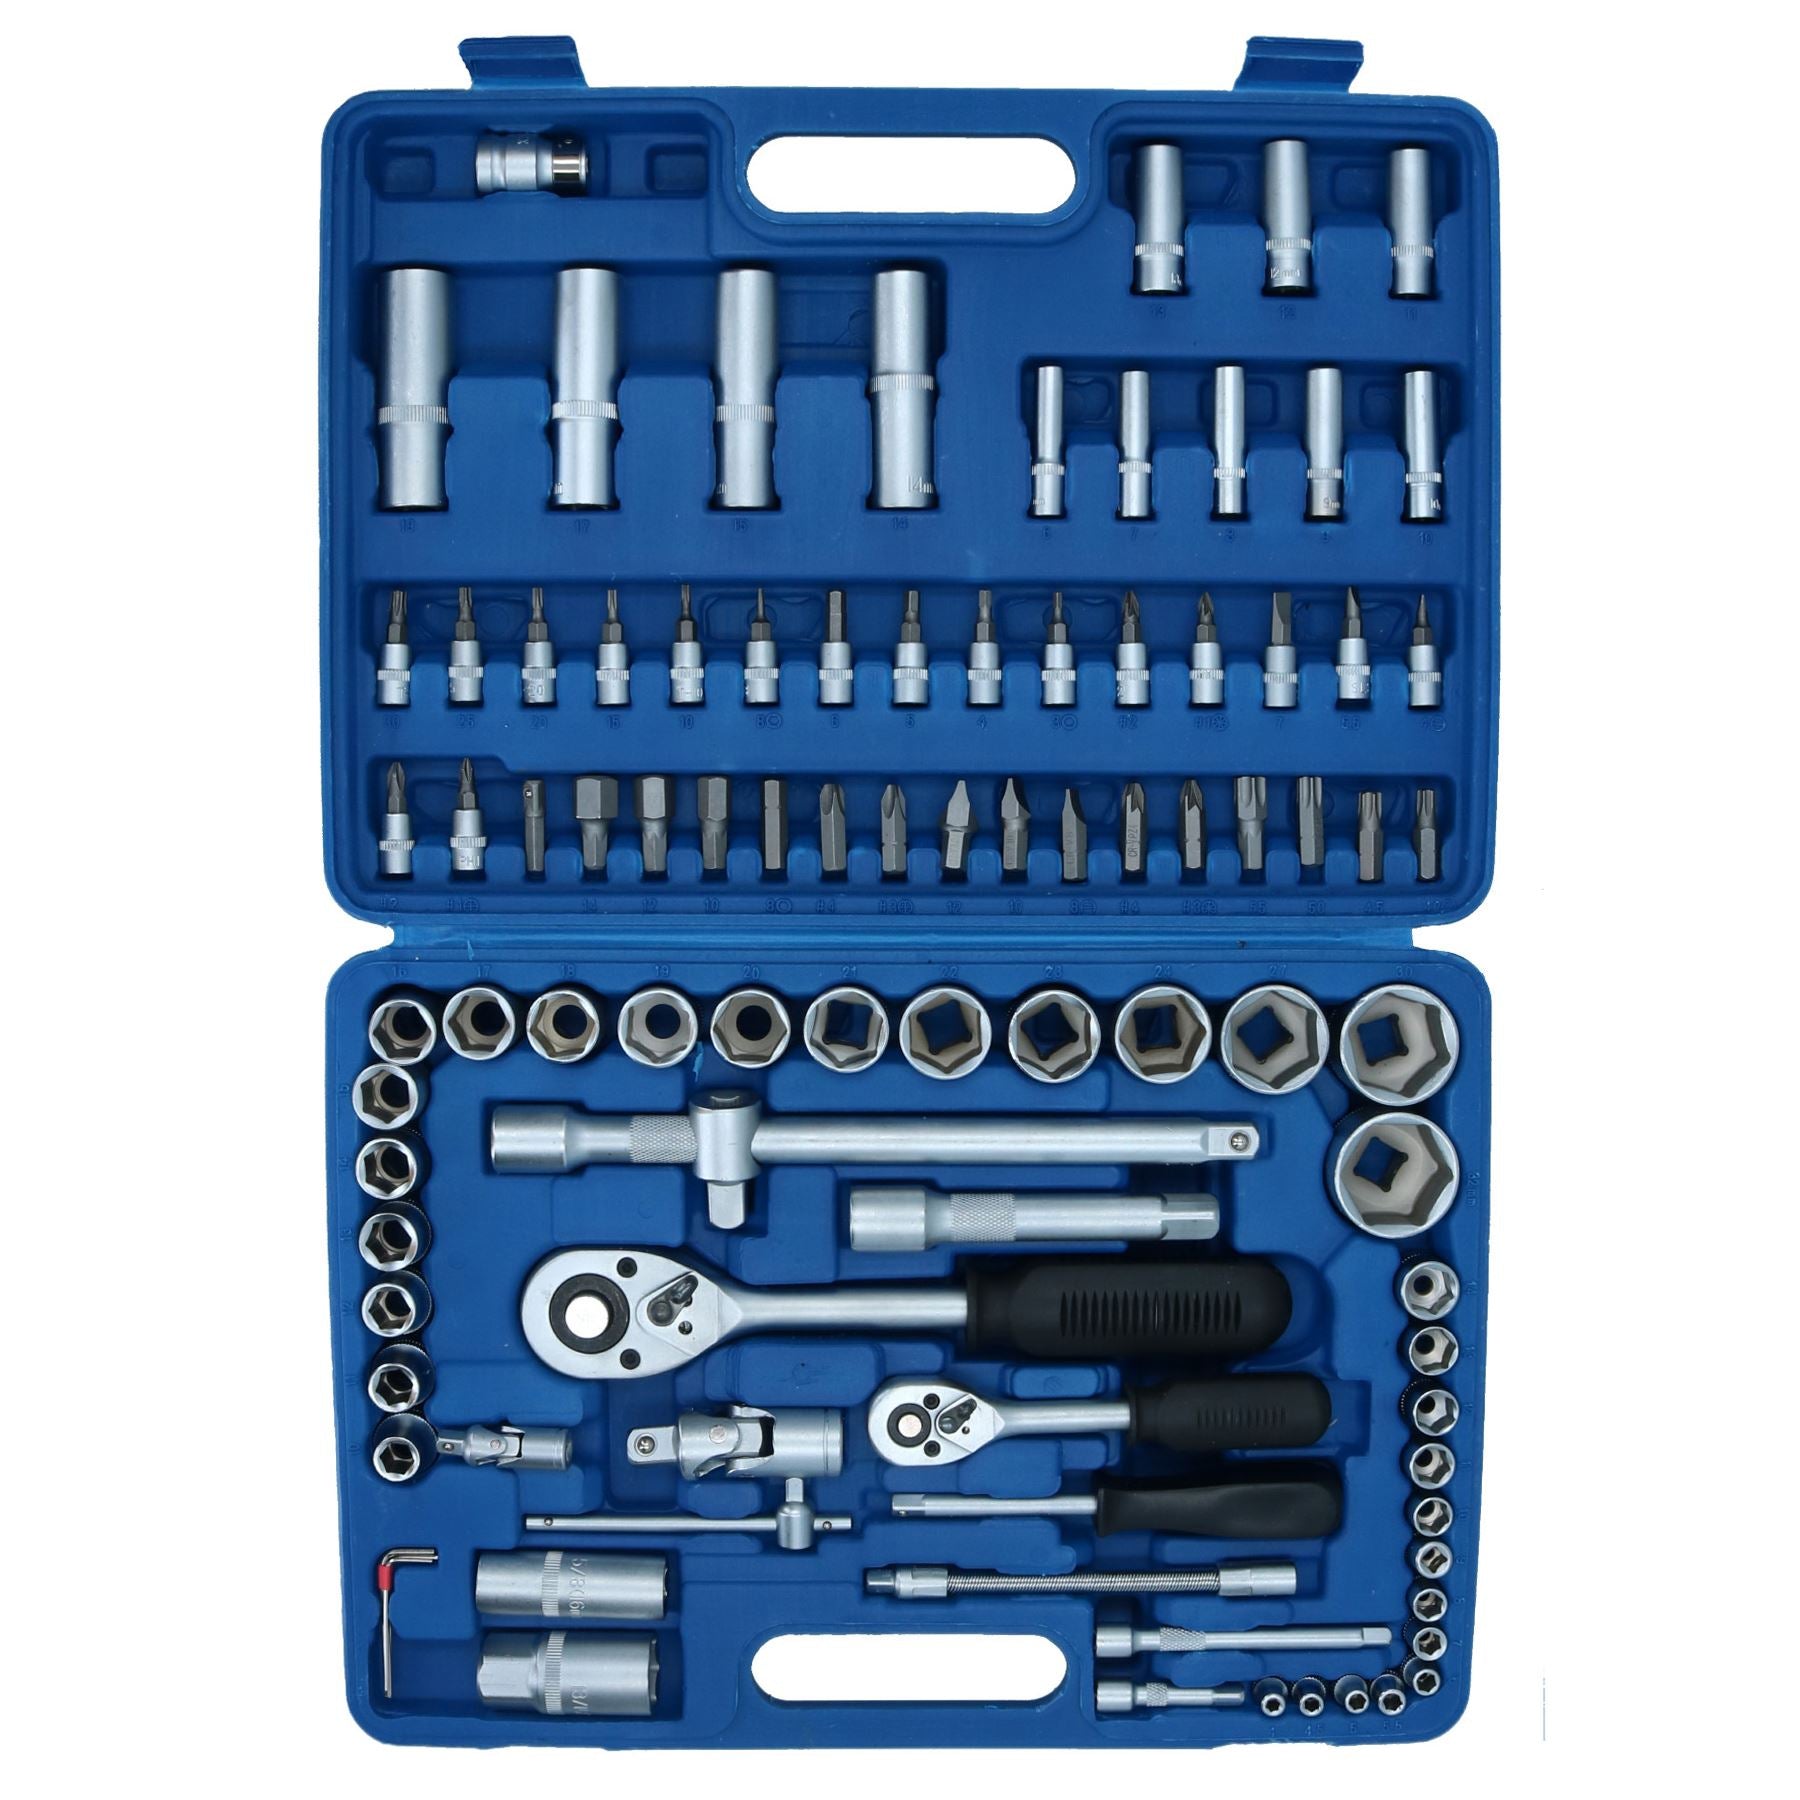 94pc Socket And Accessory Set 1/4in + 1/2in Metric Sockets Ratchets Extensions